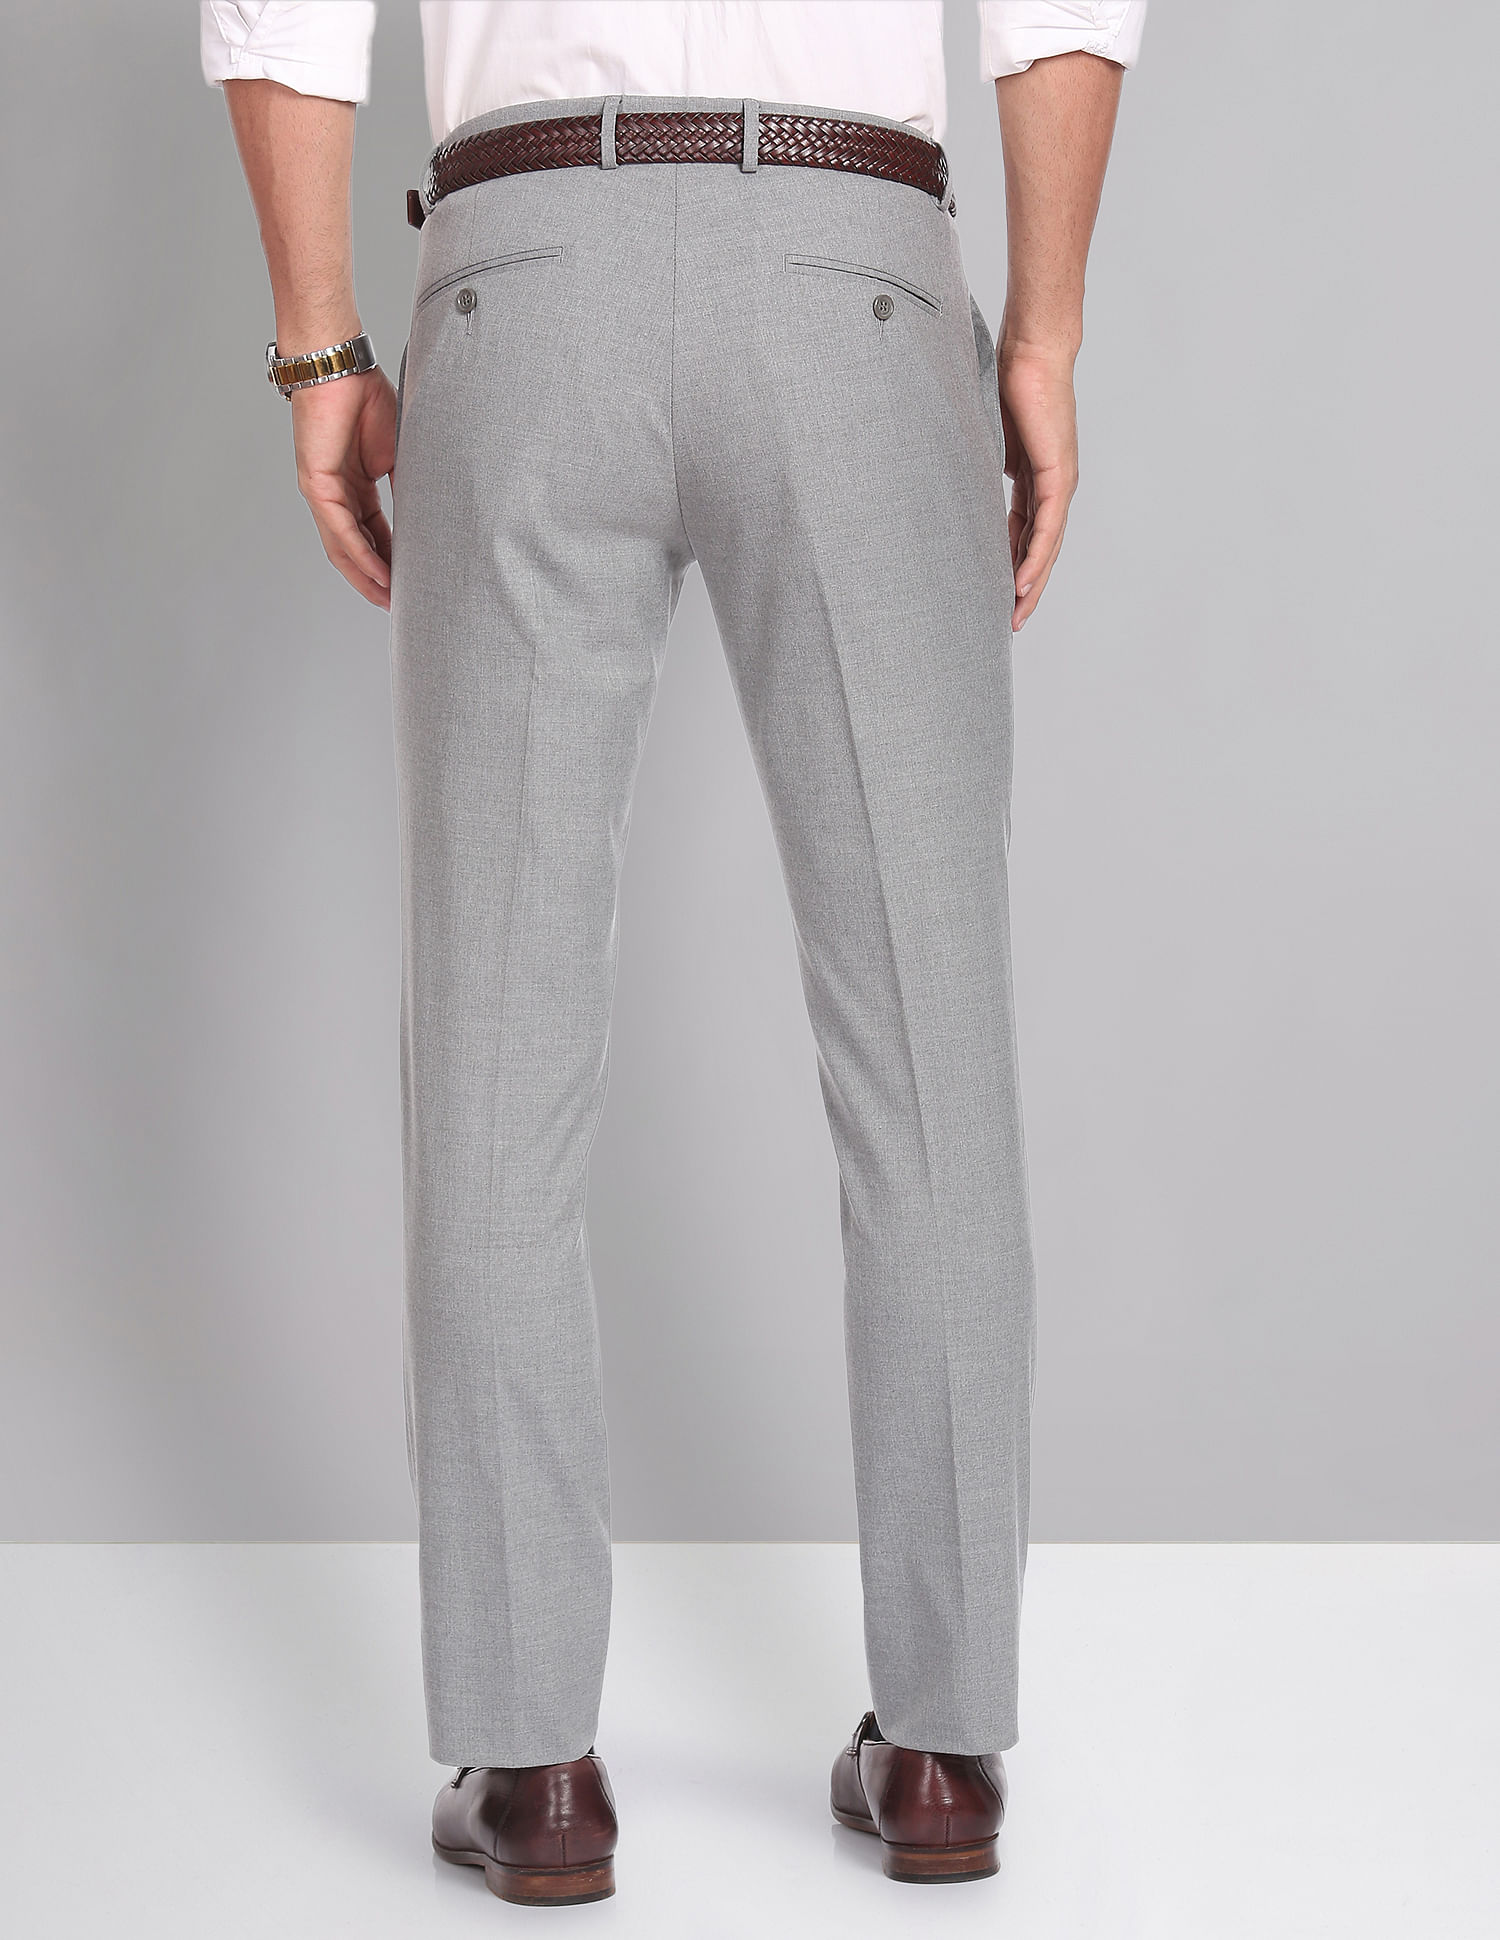 Buy AD by Arvind Smart Waist Heathered Formal Trousers - NNNOW.com